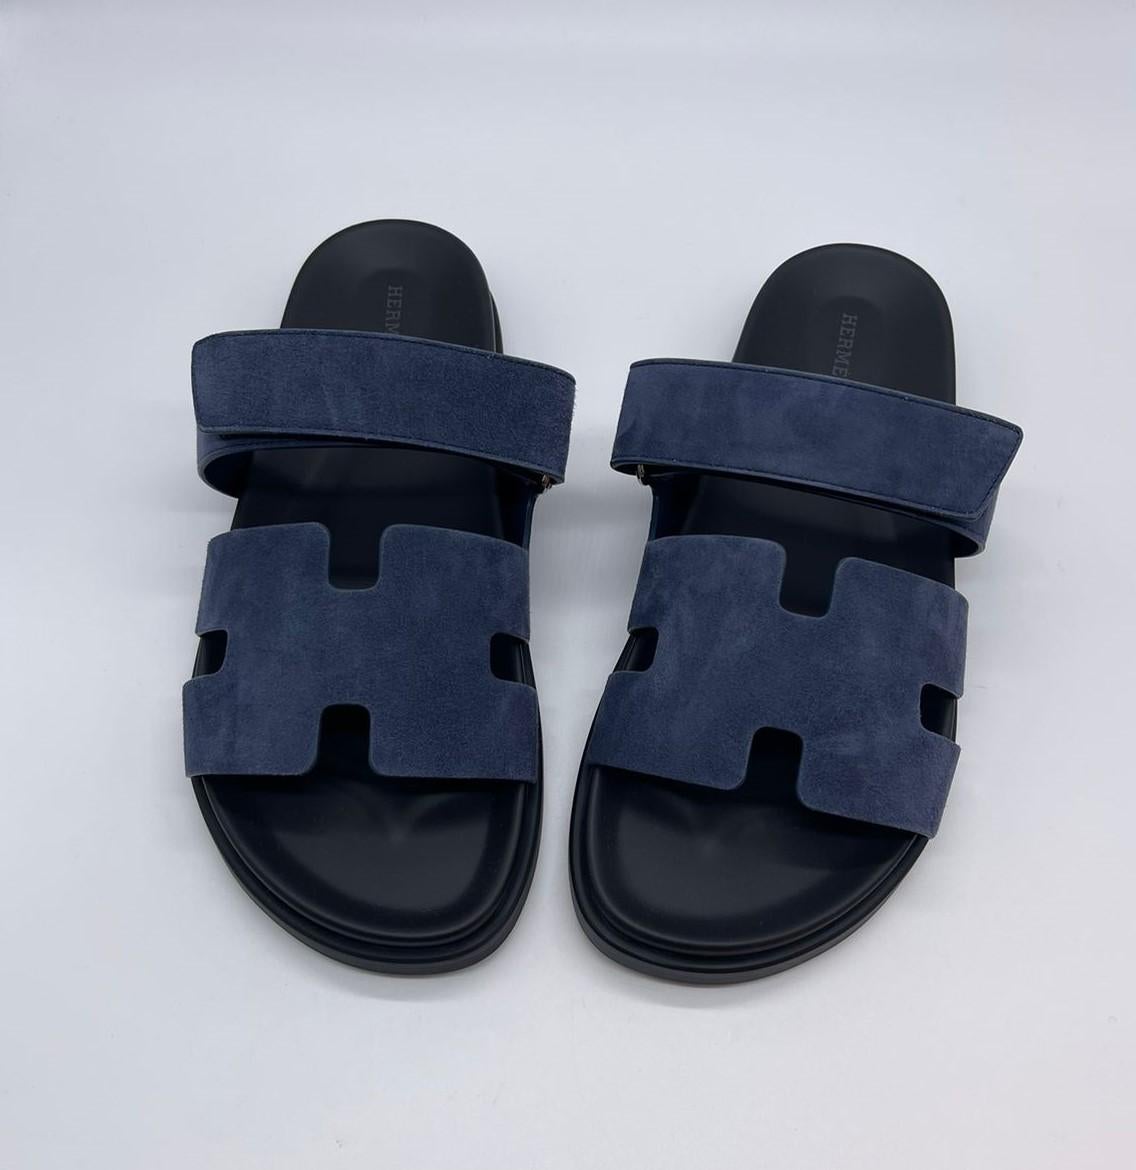 Size 42
Techno-sandal in suede goatskin with anatomical rubber sole and adjustable strap.
A sleek design for a comfortable casual look.
Made in Italy